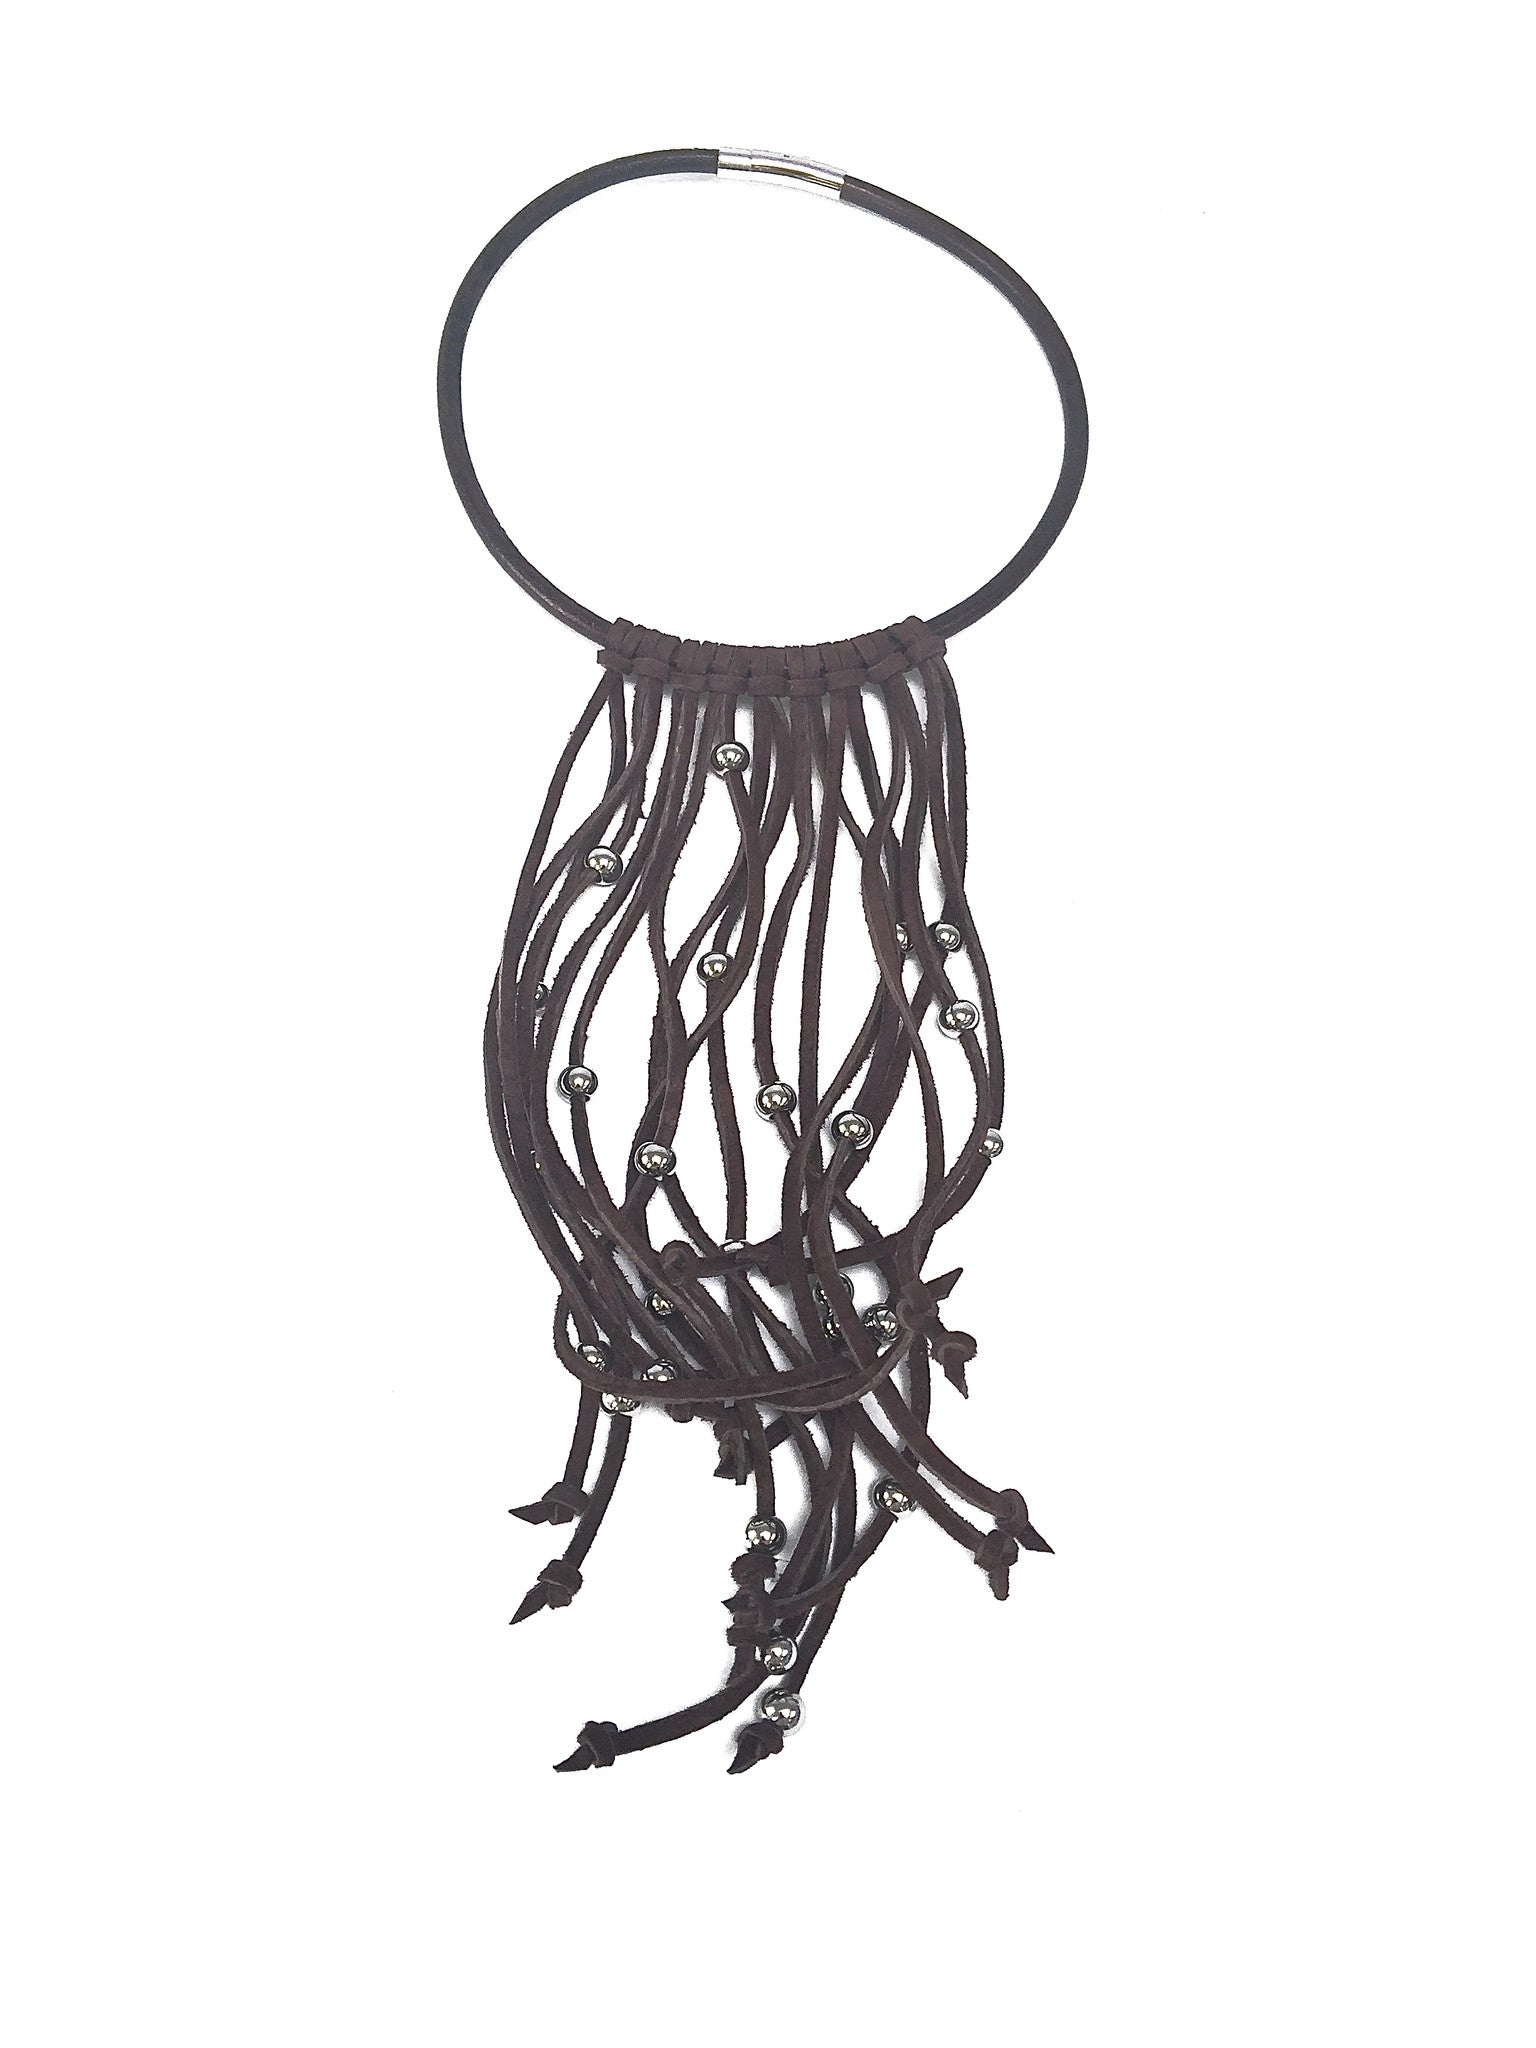 pinball necklace Brown with suede fringe by nyet jewelry.